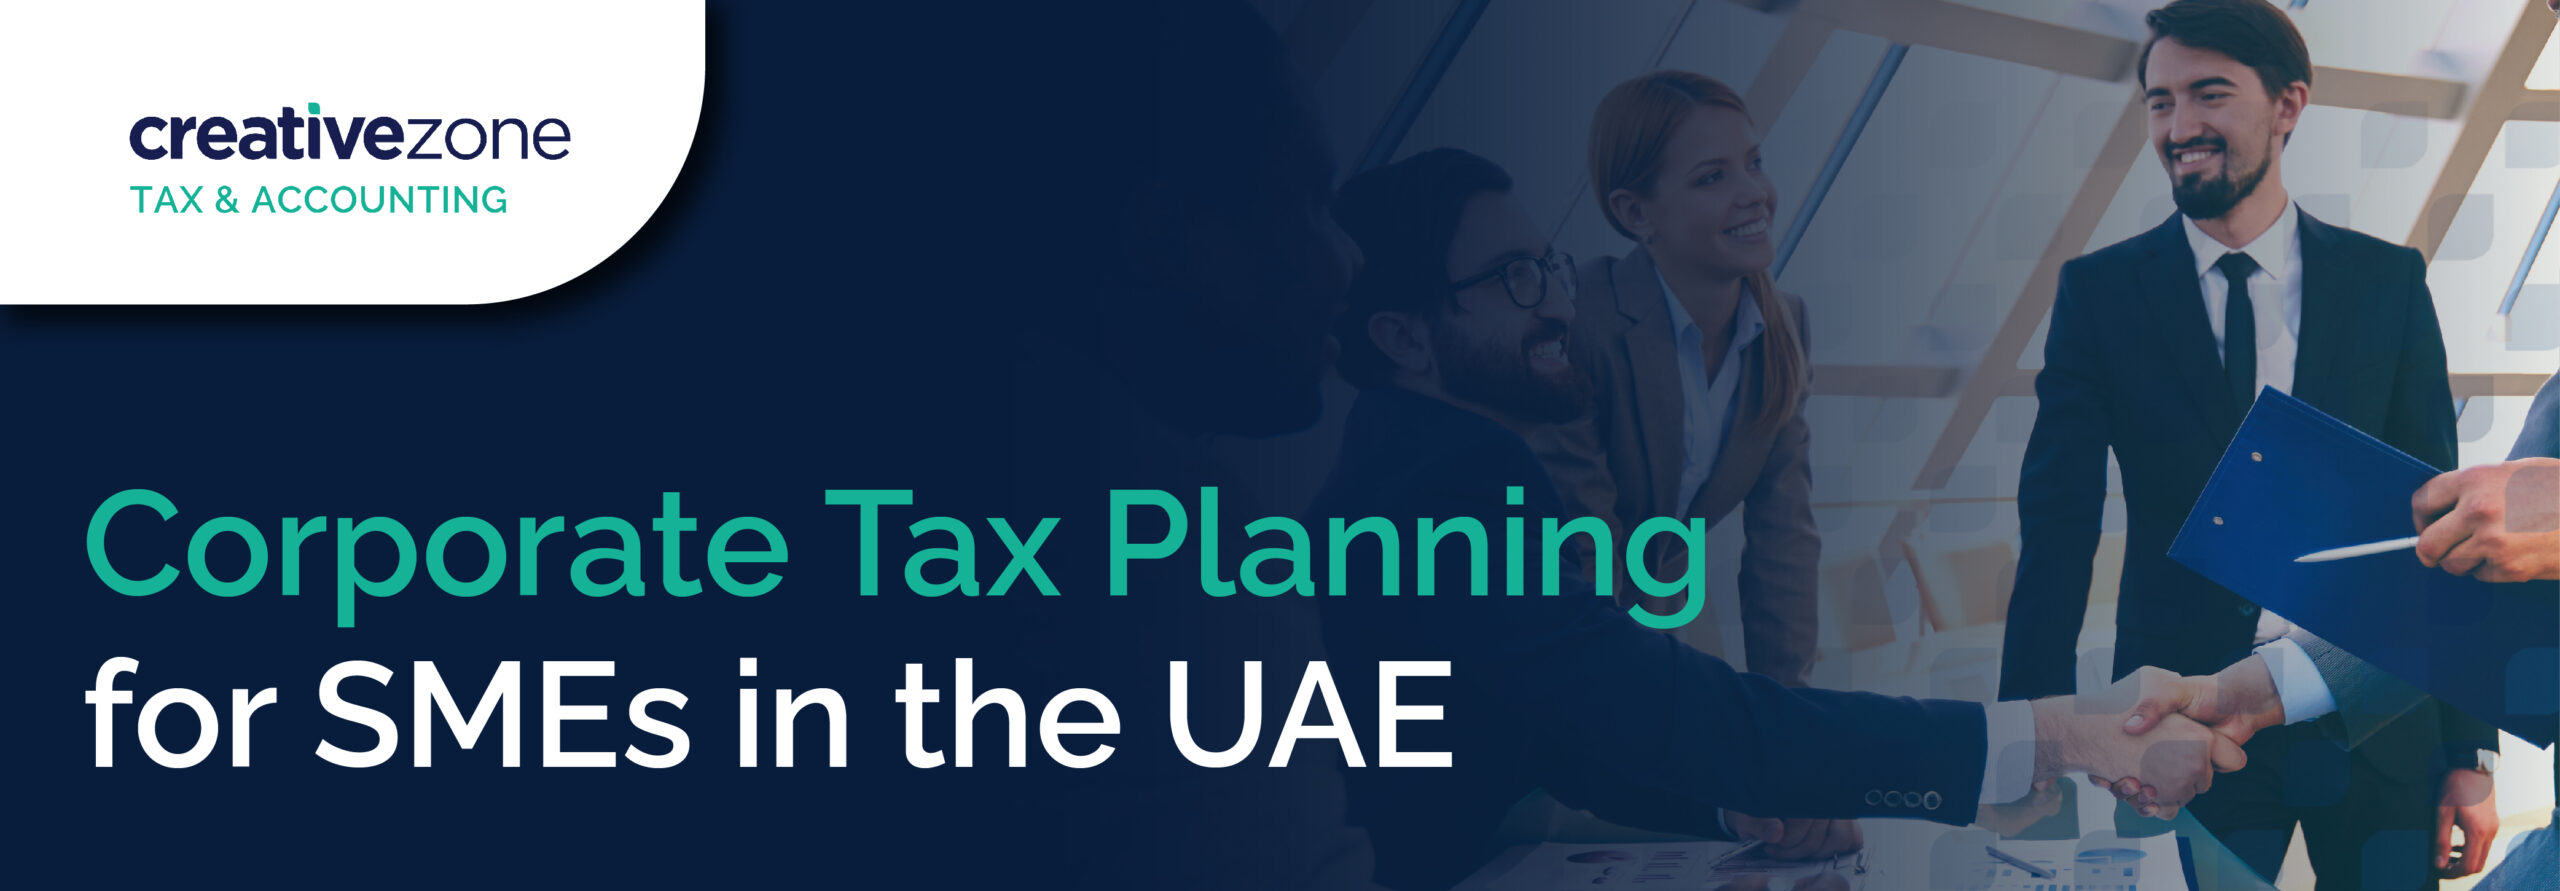 Corporate Tax Planning for SMEs